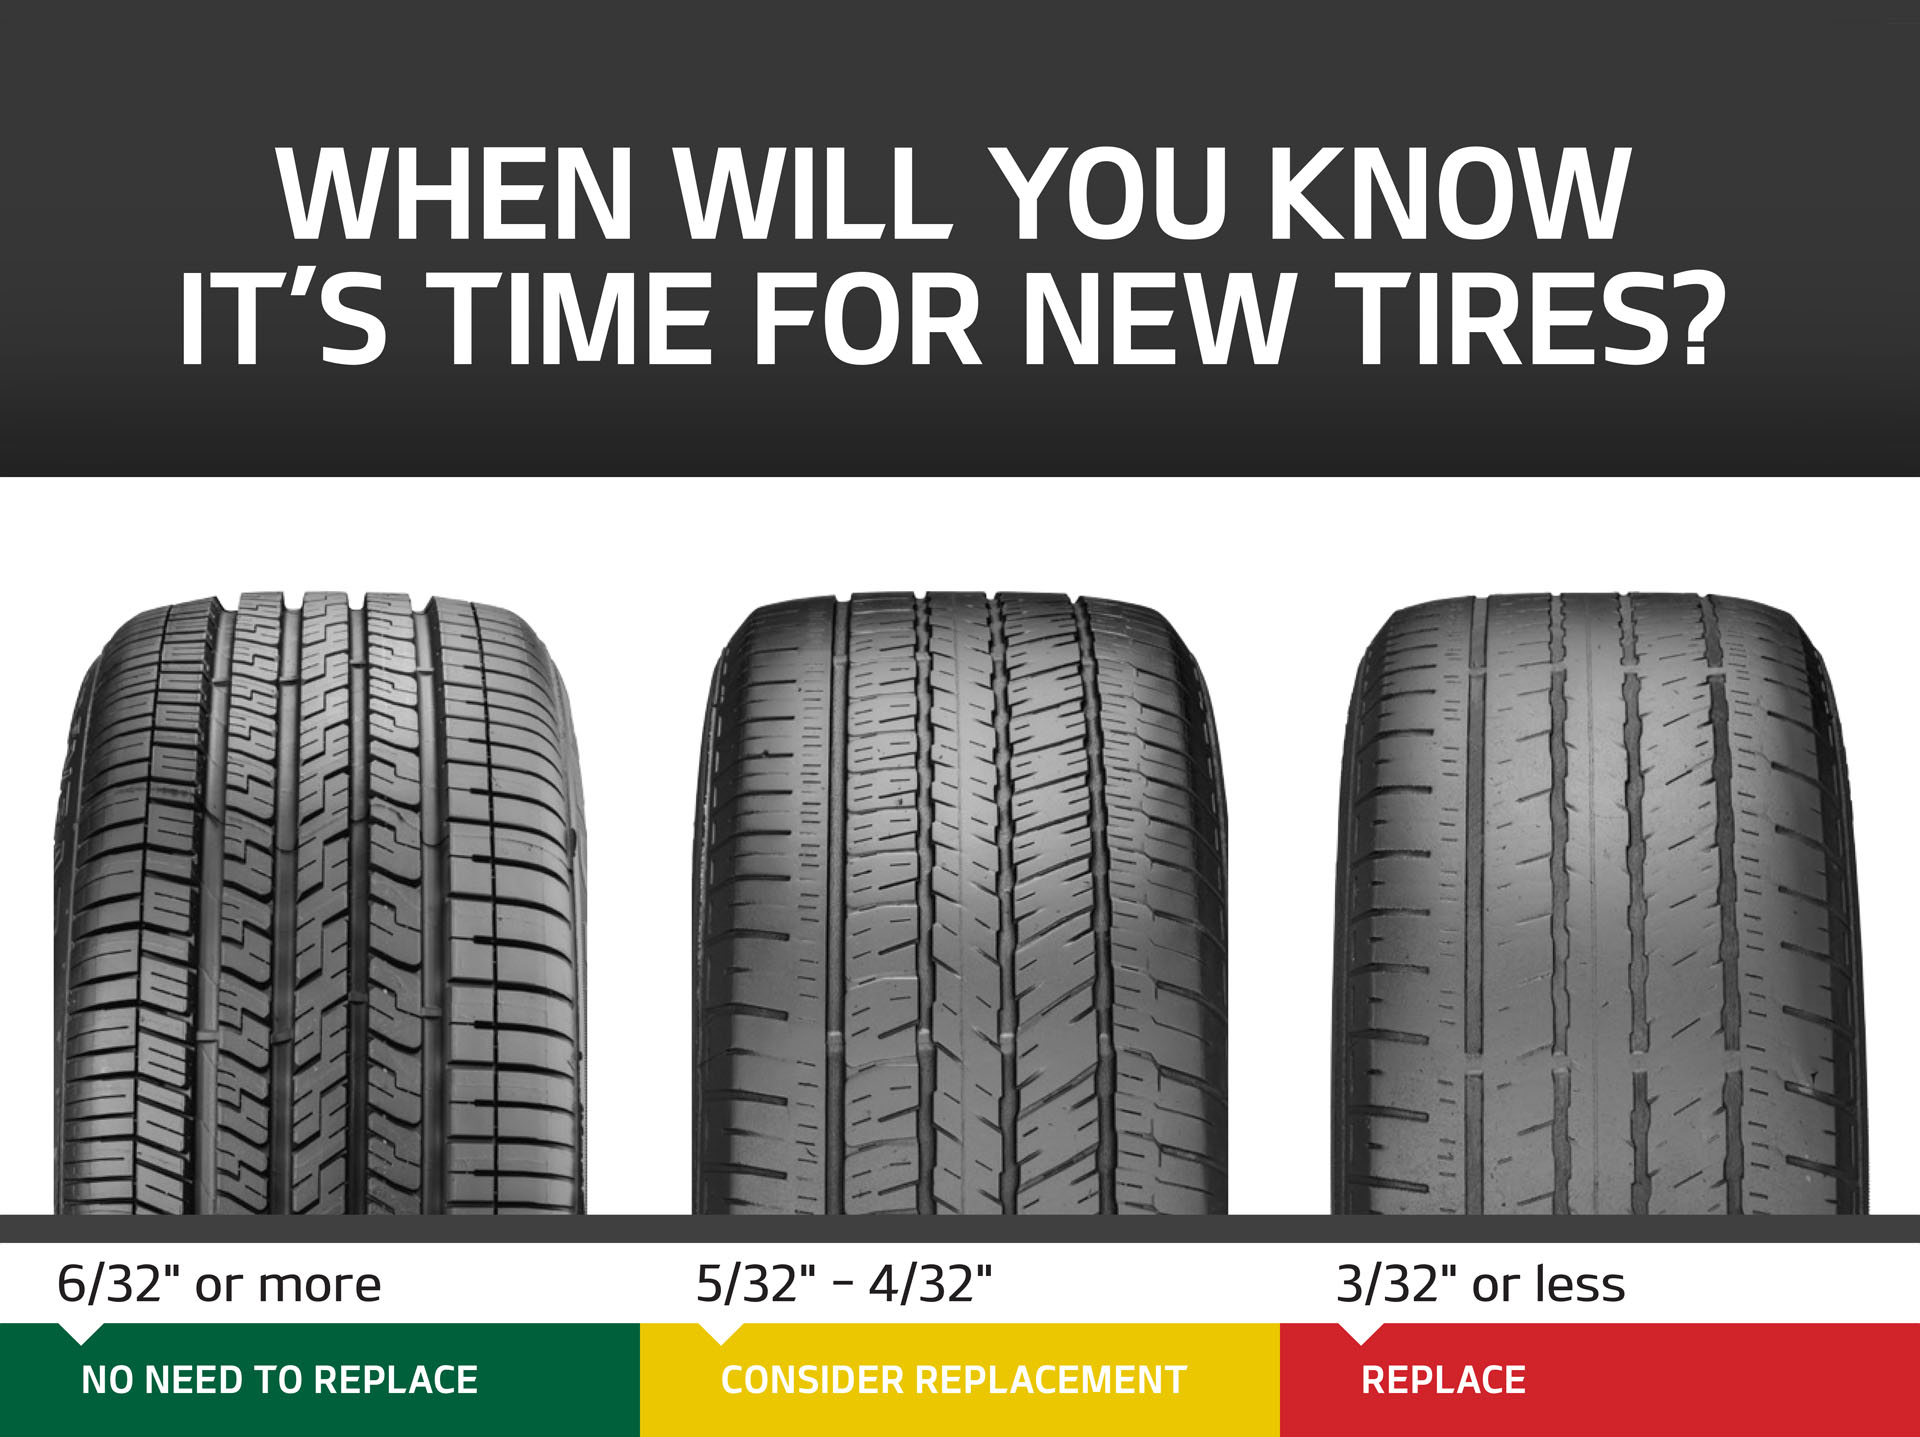 When Will You Know It's Time For New Tires?